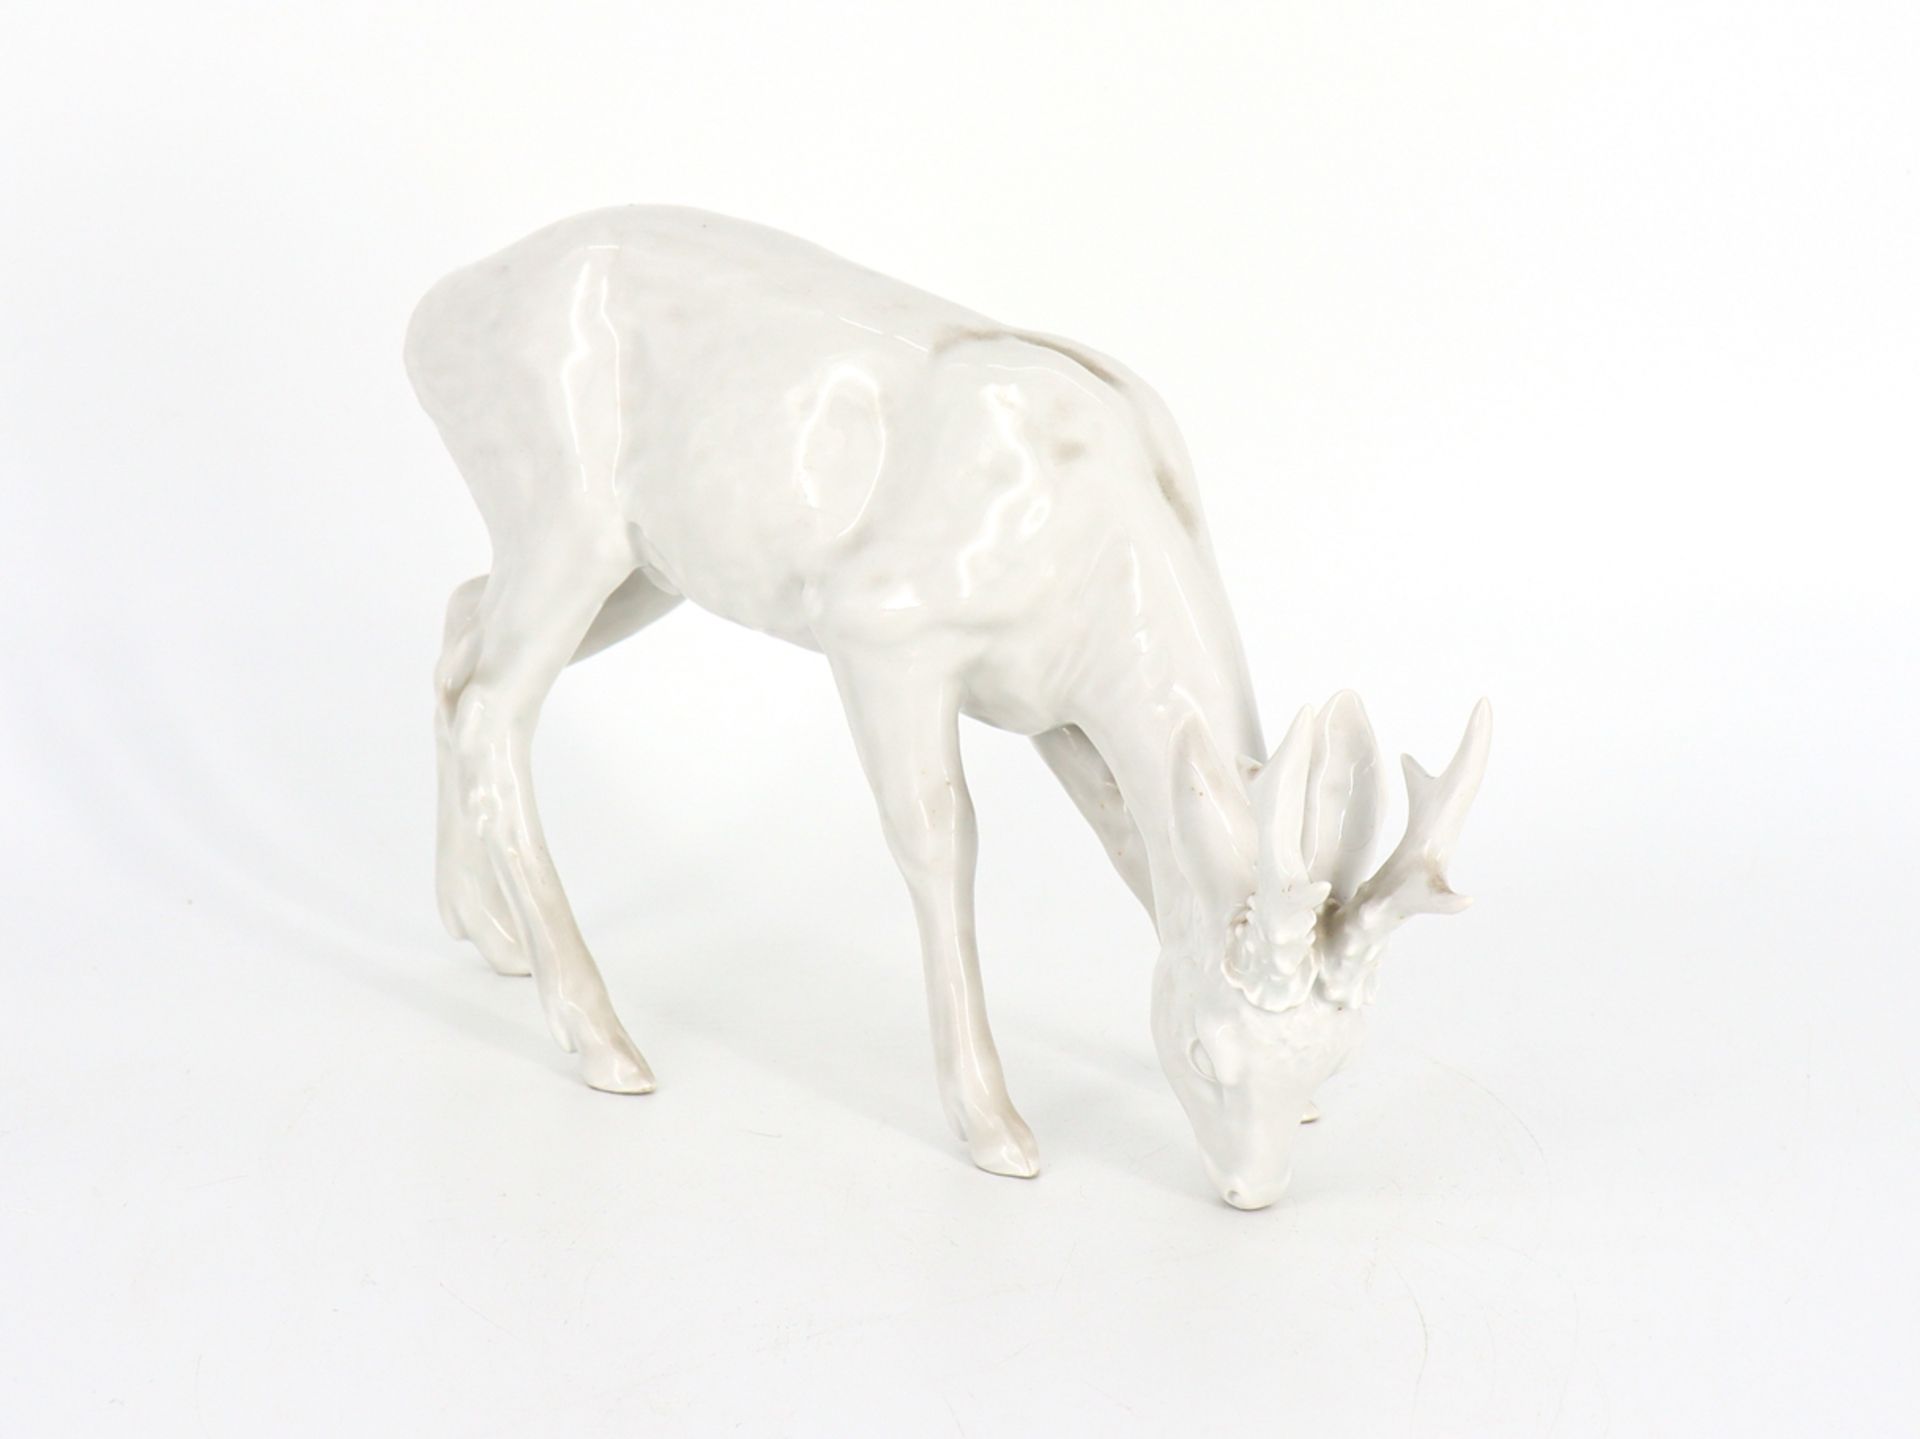 Willi Münch-Khe (1885-1960) Meissen young roebuck, design from 1938. - Image 8 of 8